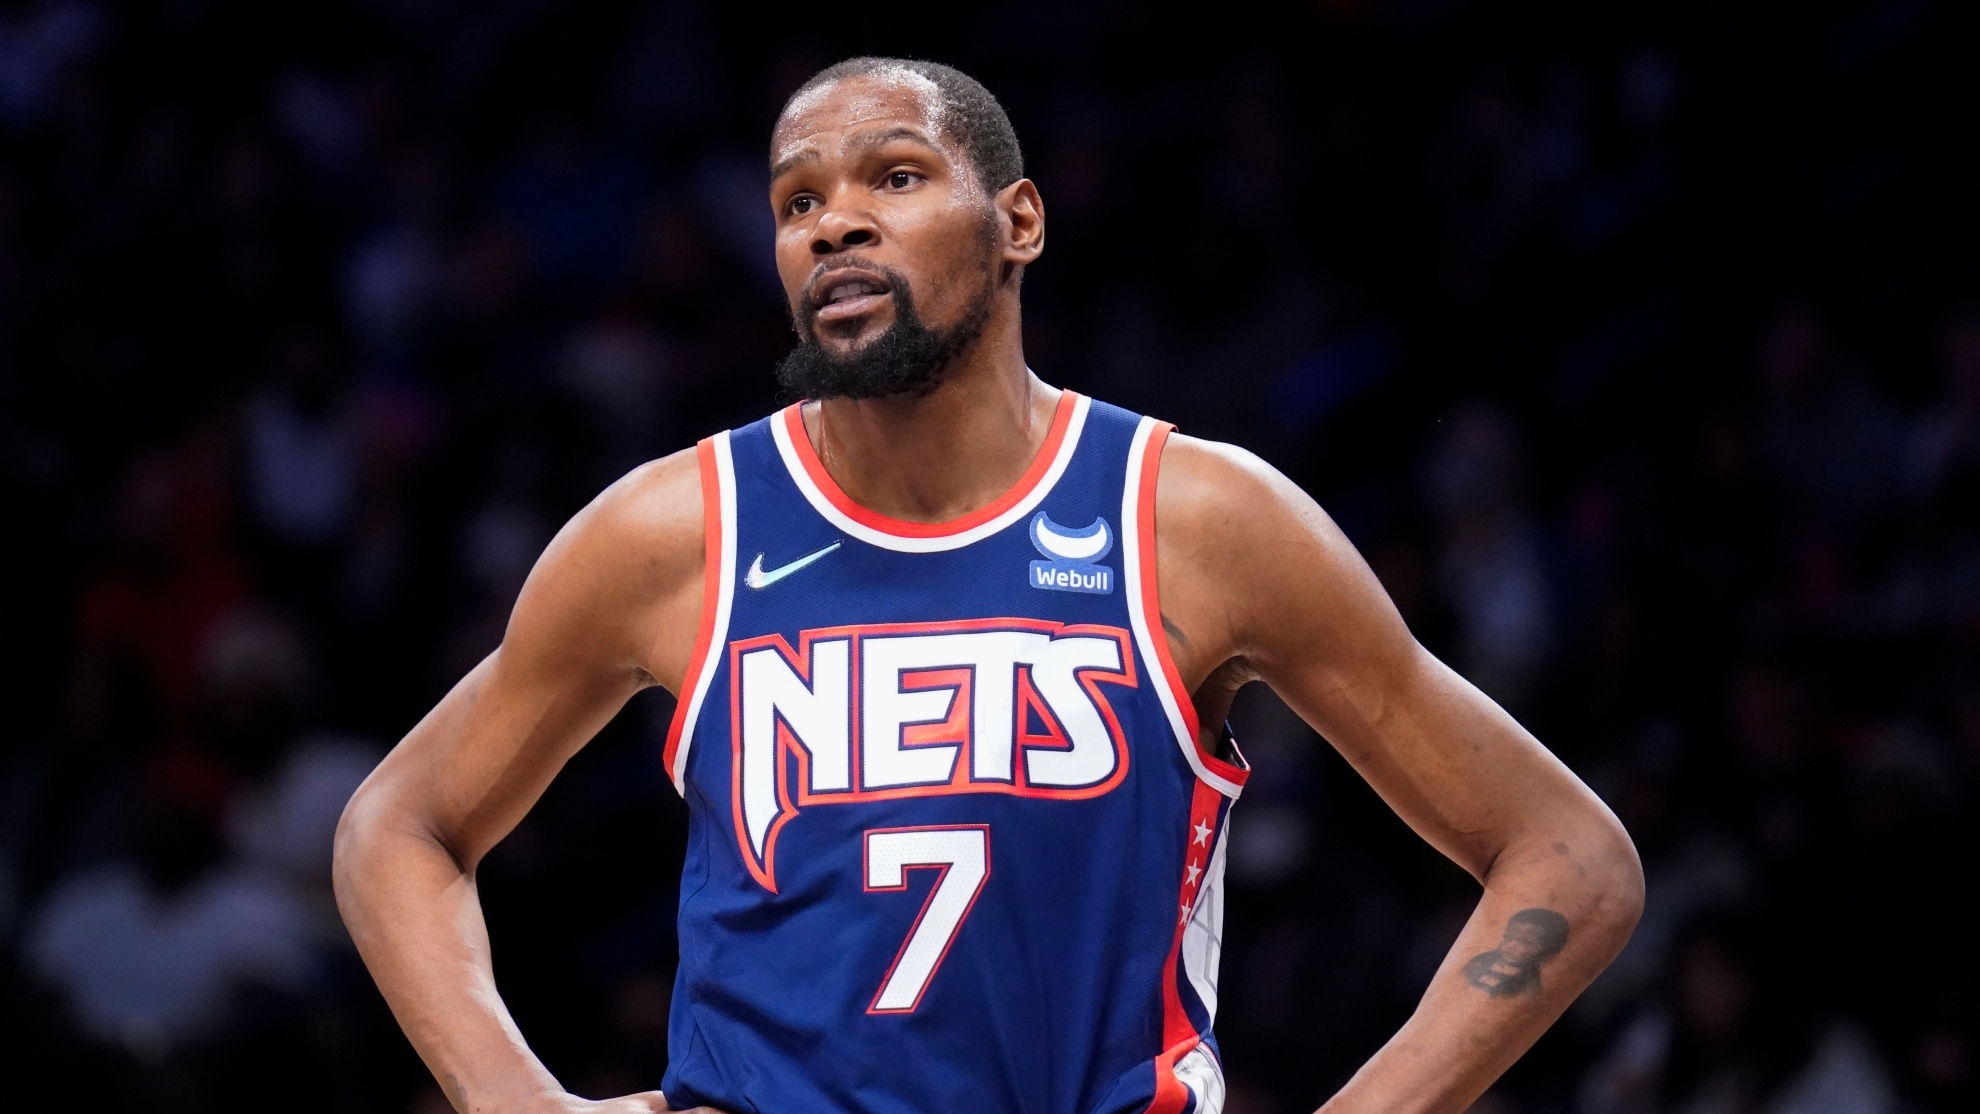 Kevin Durant reacts to a referee's call during the first half of the team's NBA basketball game against the Miami Heat, Thursday, March 3, 2022